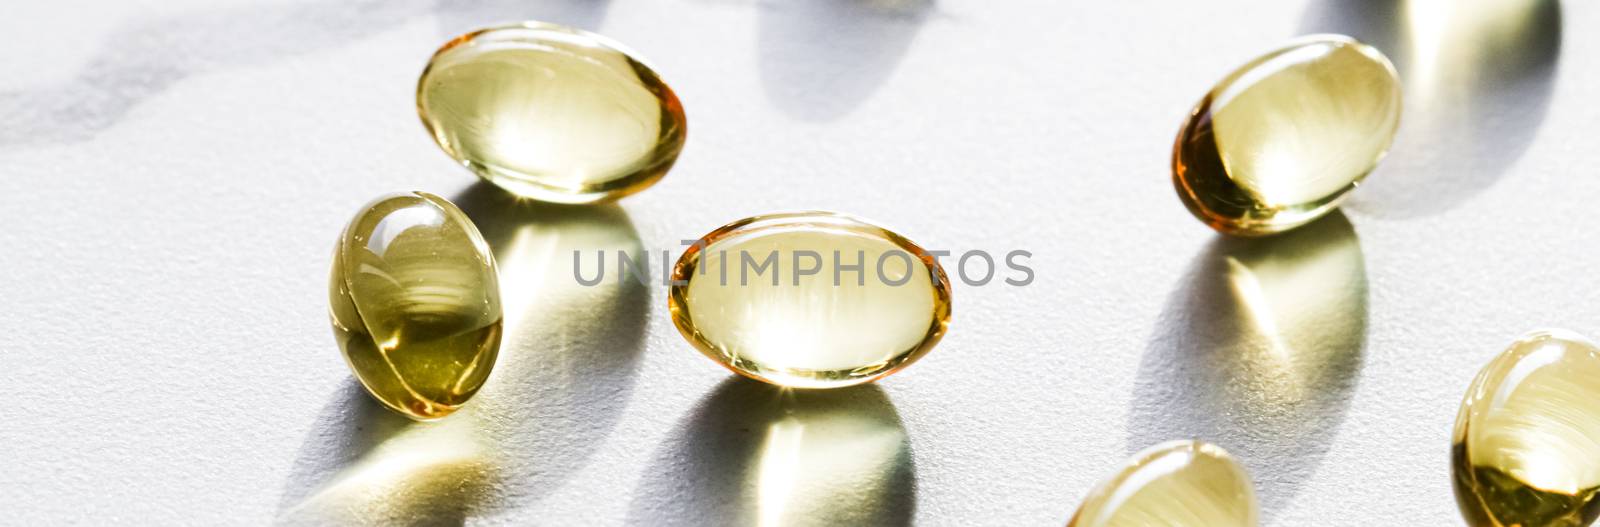 Omega 3 fish oil capsules for healthy diet nutrition, pharma brand store, probiotic drug pills as healthcare or supplement products for pharmaceutical industry ads